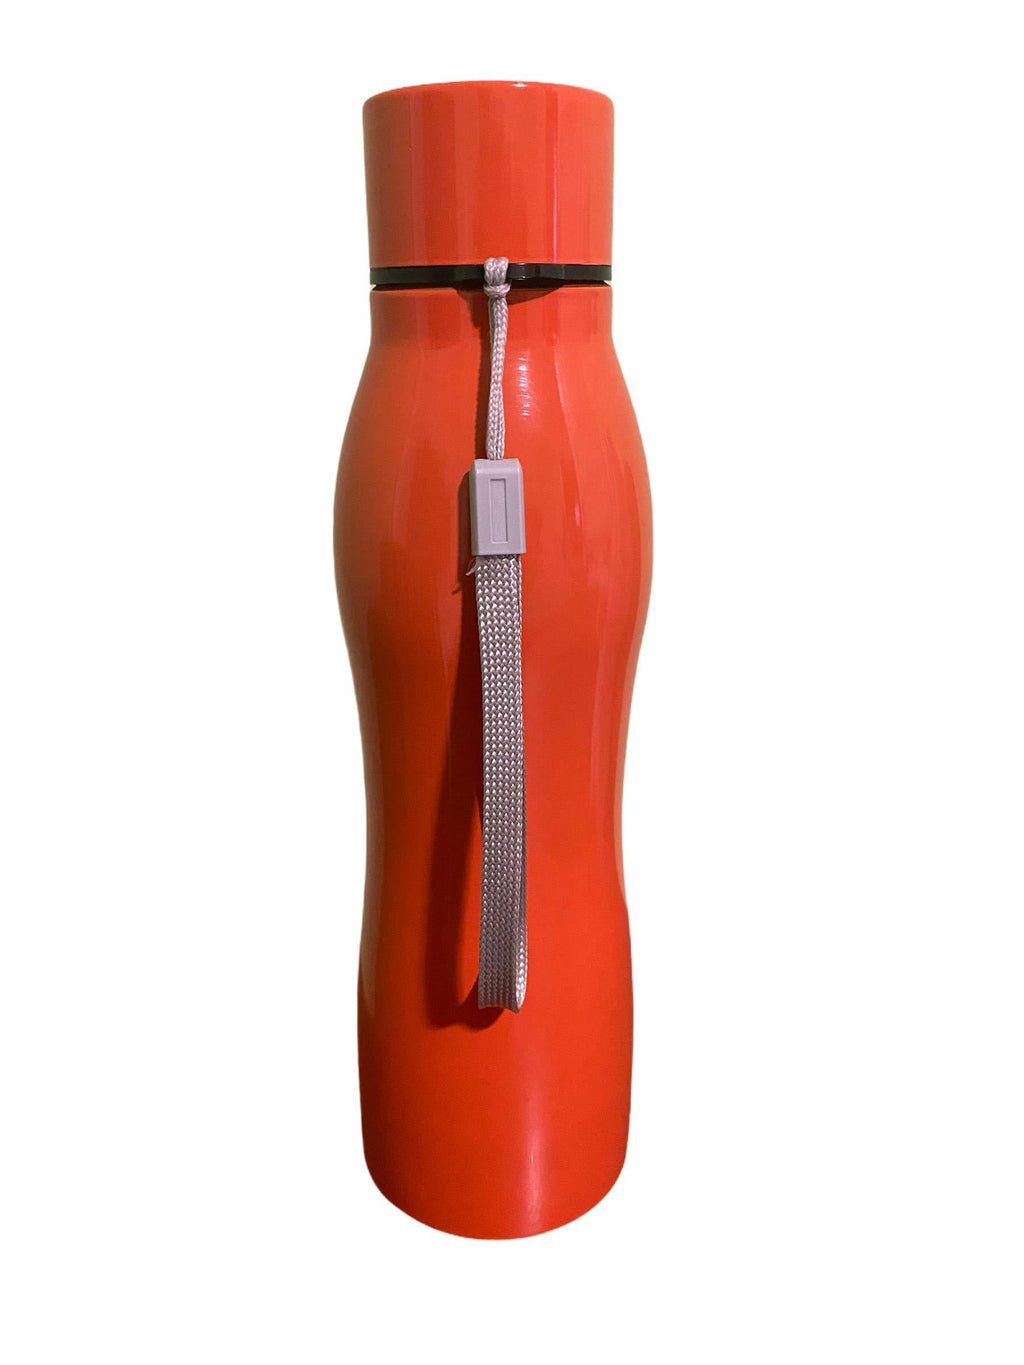 6TT7 Water Bottle - Stainless Steel - 750ml - 25 Ounce - Orange - Leak Proof Cap - Durable - BPA Free - Eco Friendly - Light Weight - Portable - Hydration - Easy to Clean - BeesActive Australia